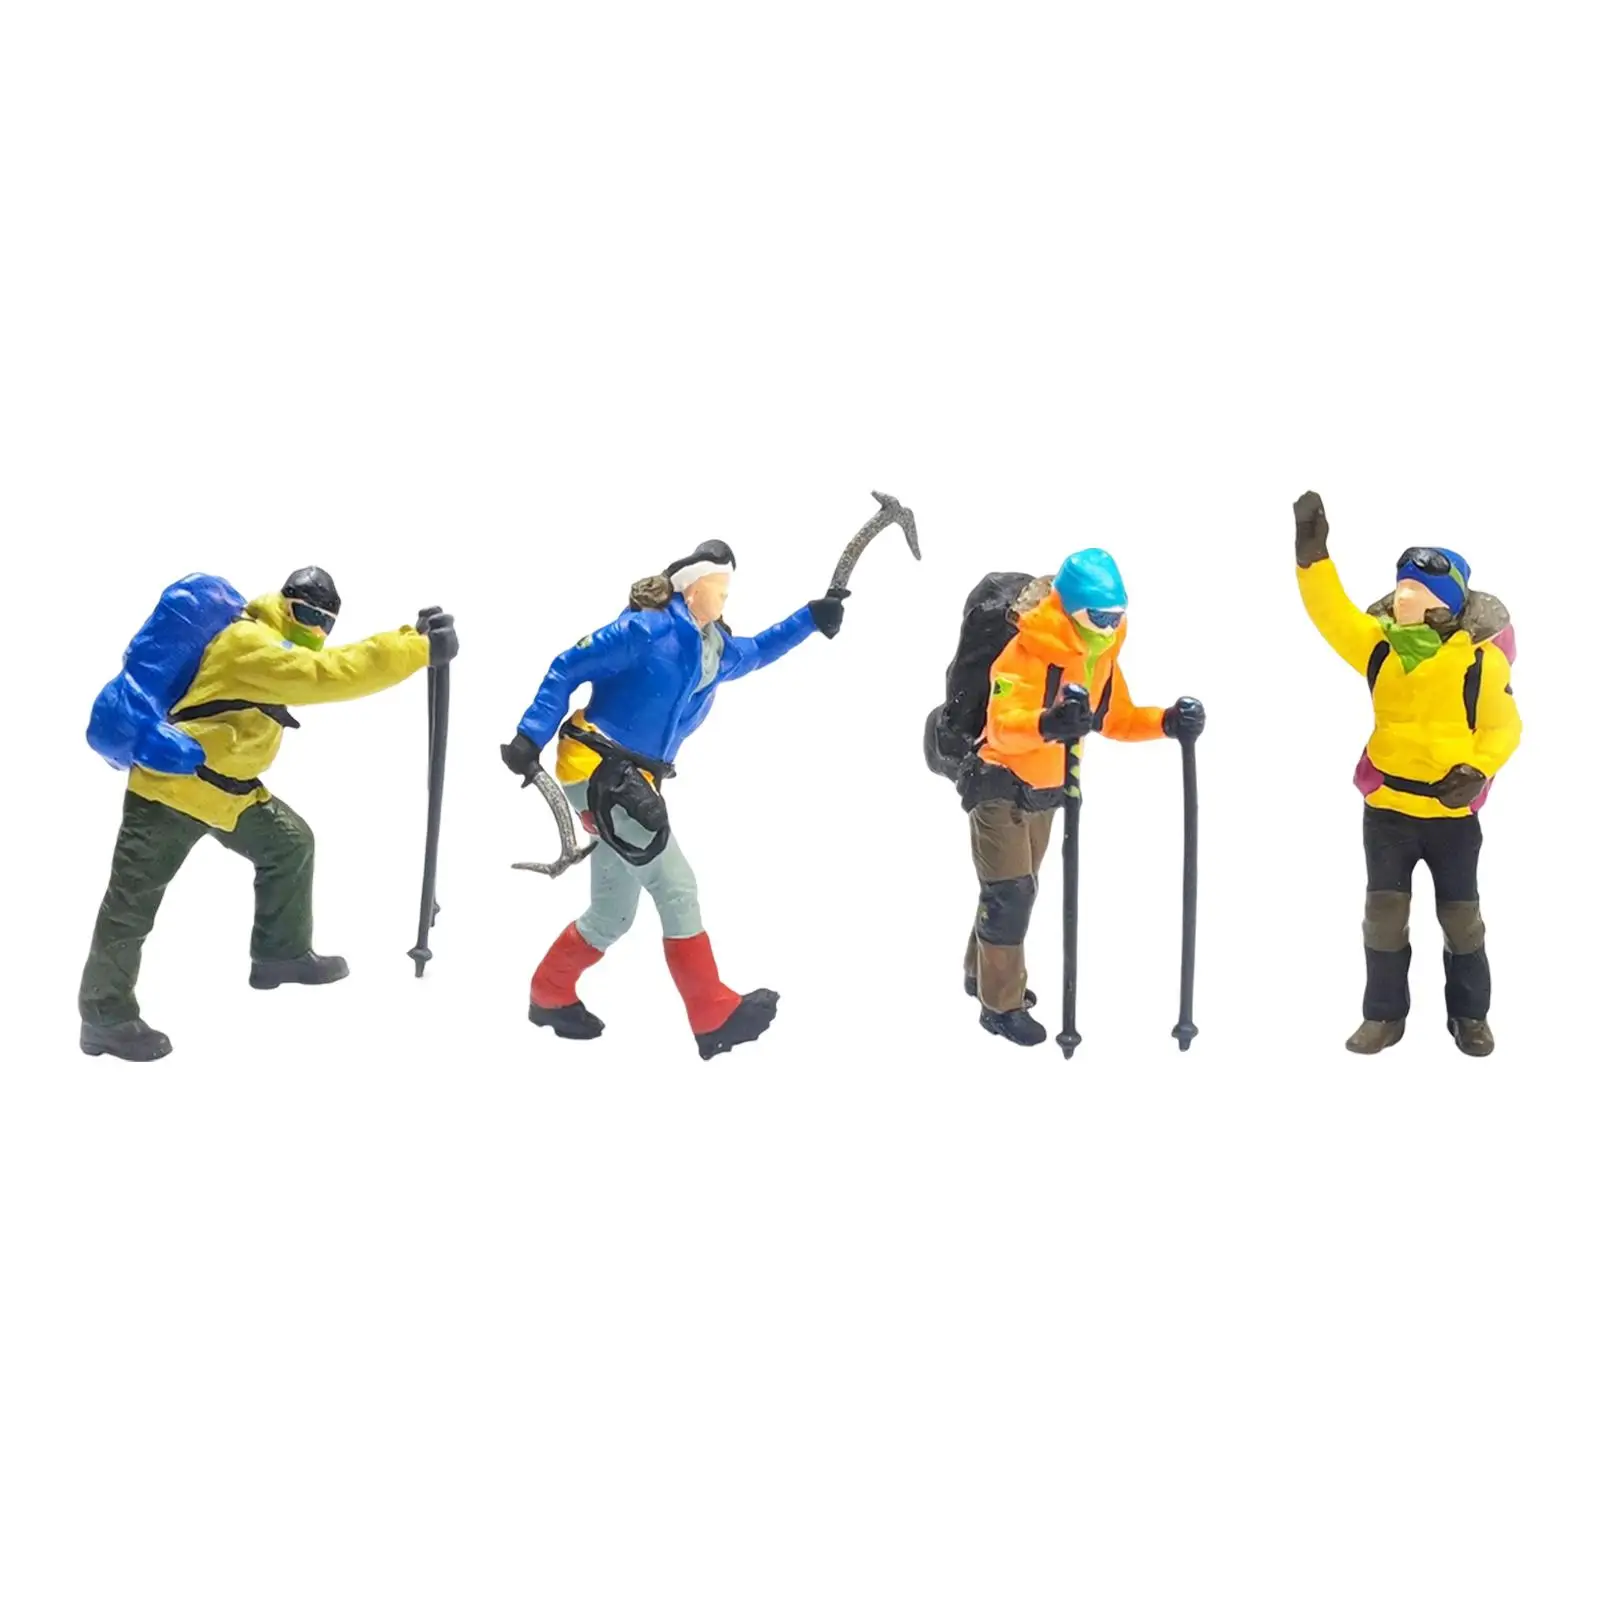 Resin 1/64 Climbing People Figurines Ornament for DIY Projects Sand Table Layout Decor